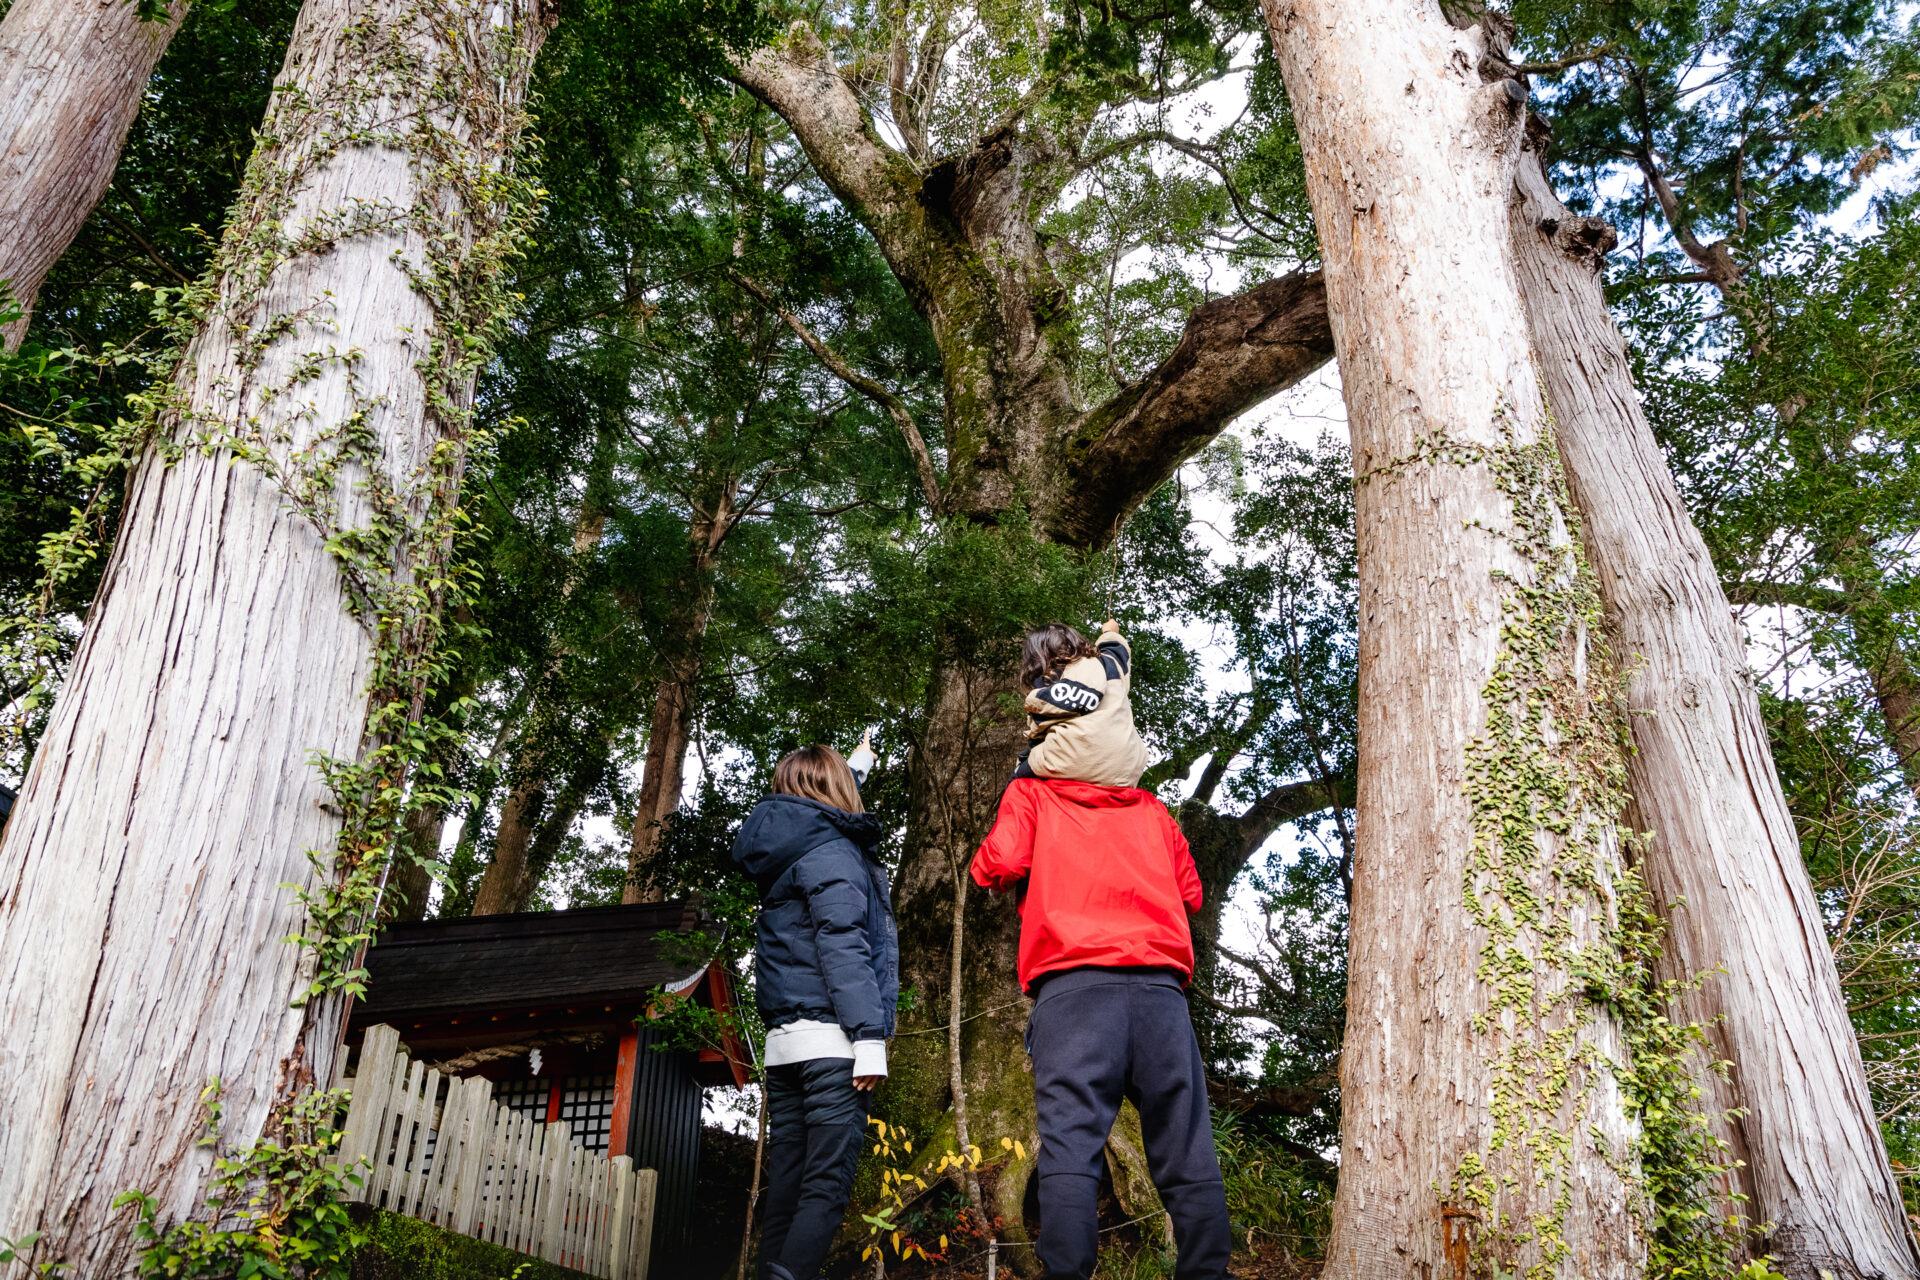 What clothes, shoes, and belongings should you take with you to Kumano Kodo? Introducing seasonal equipment!